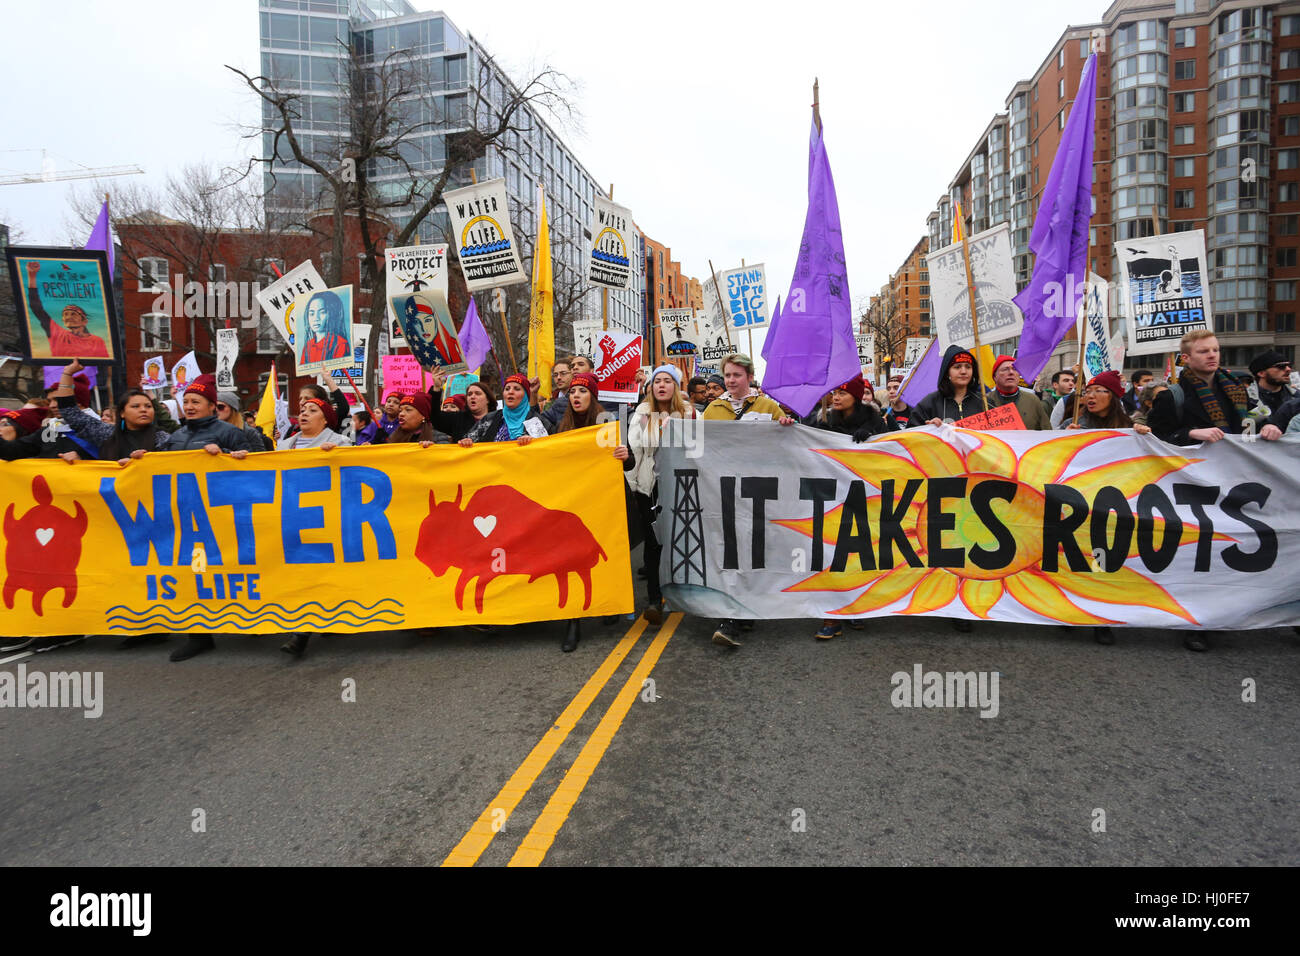 Washington, DC, USA. 20th January, 2017. Demonstrations on inauguration day.  Banners at the head of the women-led, climate justice march 'Festival of Resistance'. January 20, 2017. Stock Photo